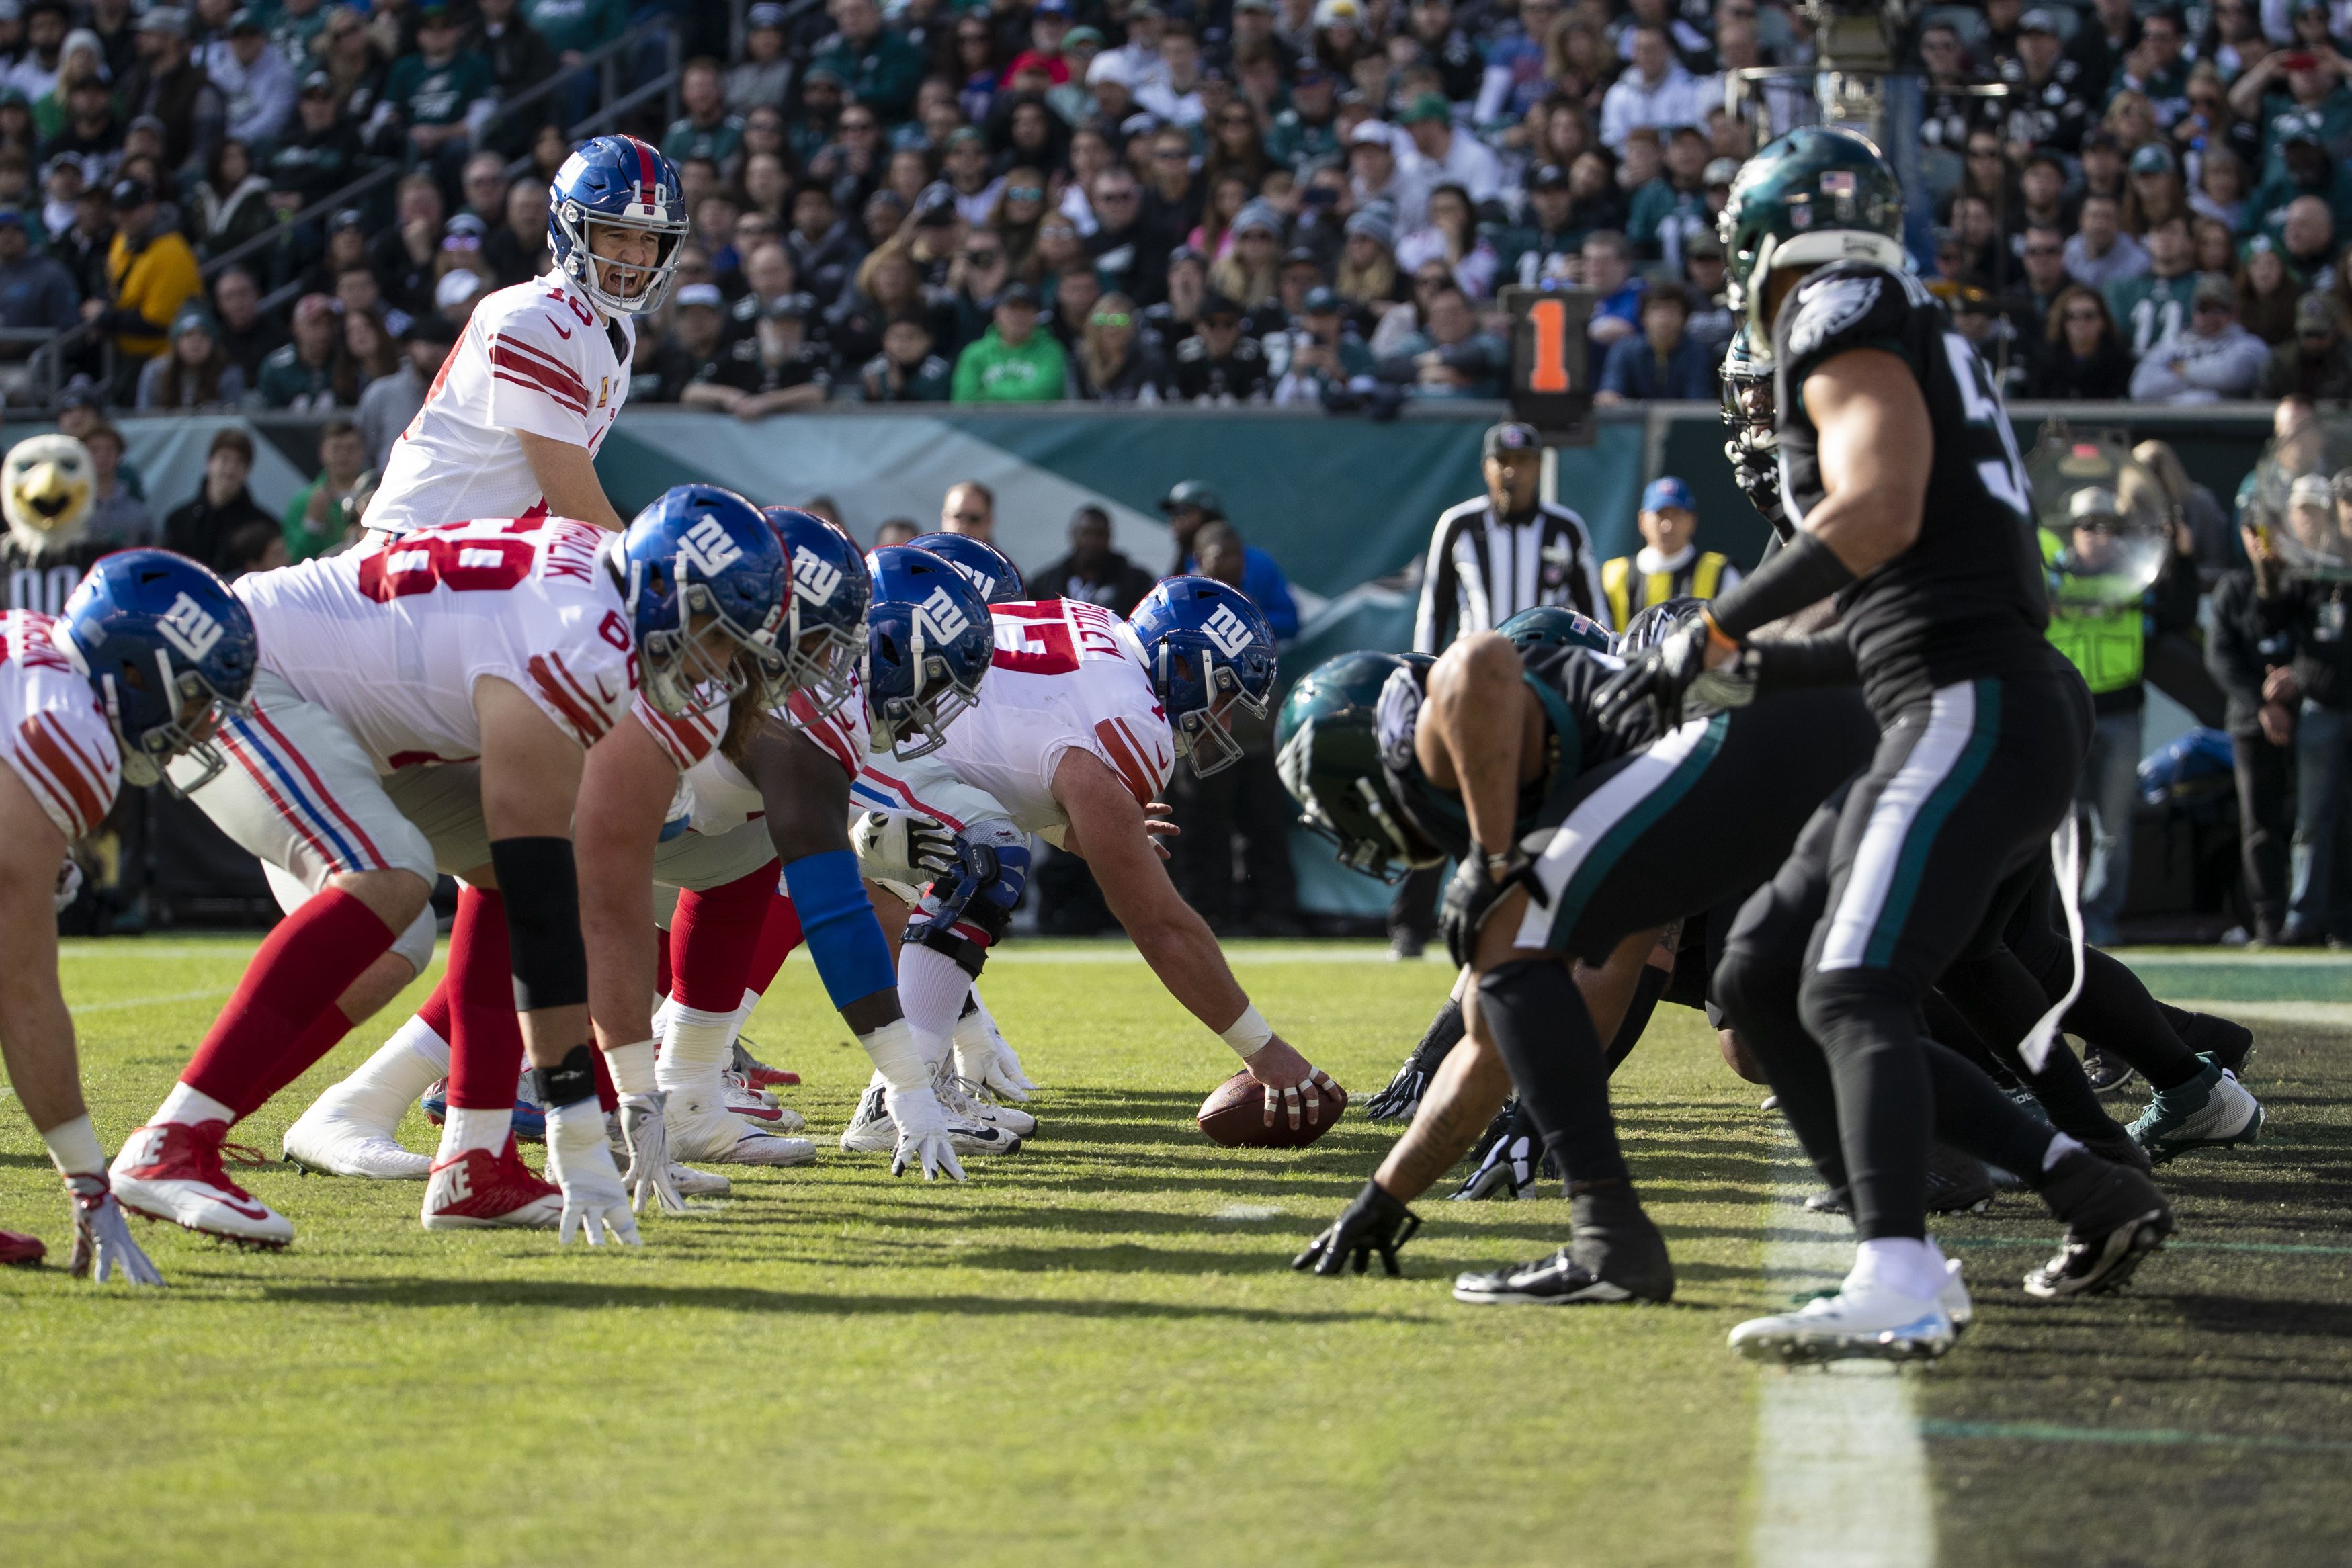 NY Giants vs. Eagles: TV, radio and streaming info for finale